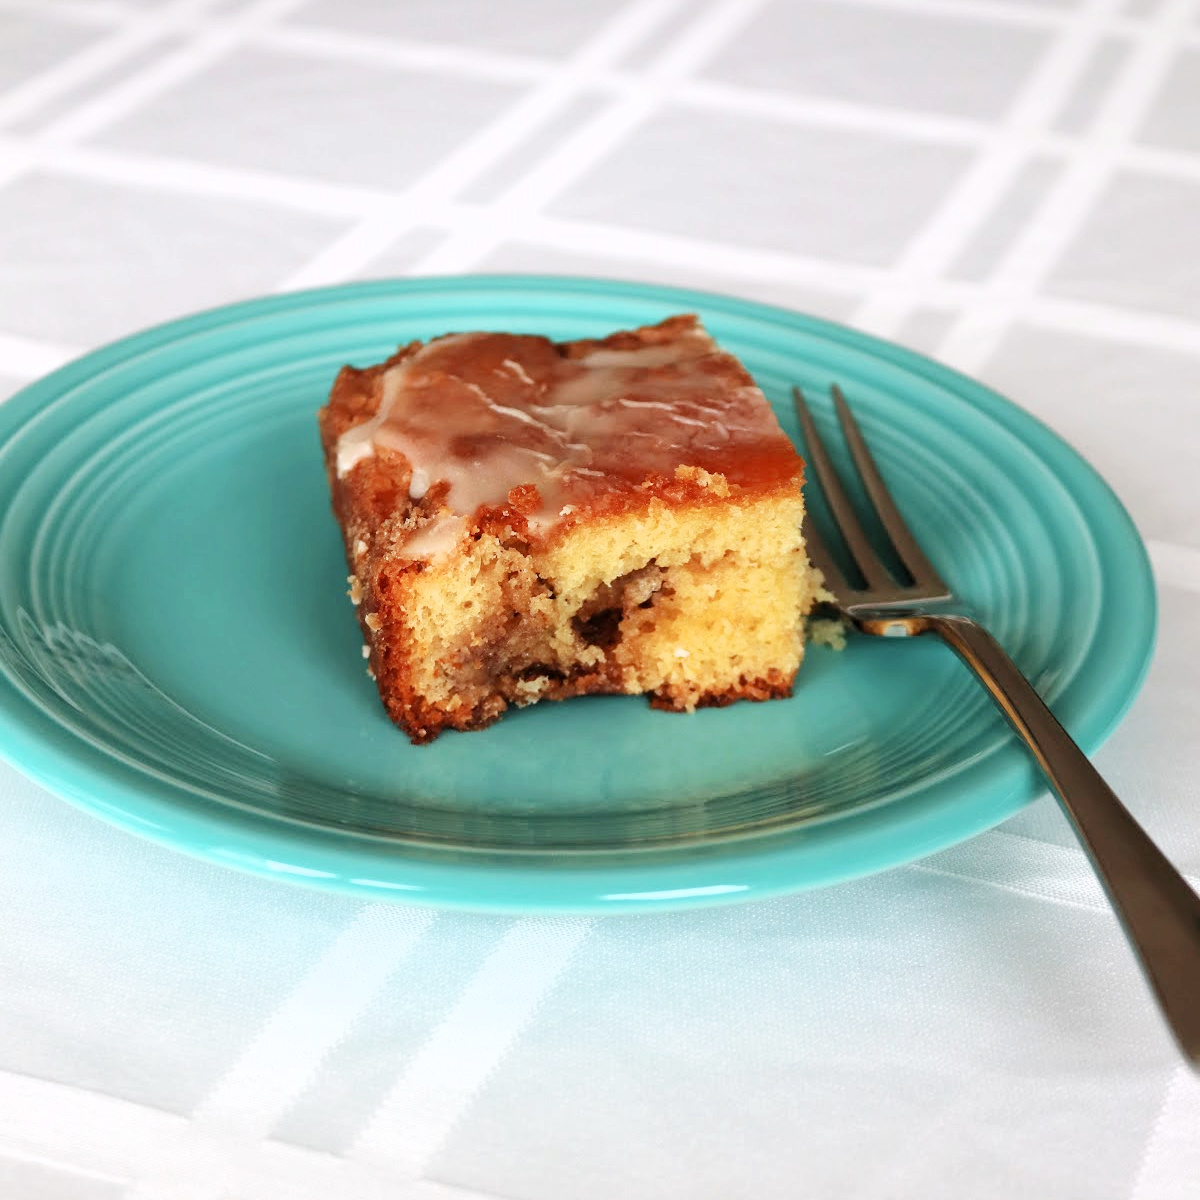 A slice of honey bun cake on a teal plate with a fork next to it.